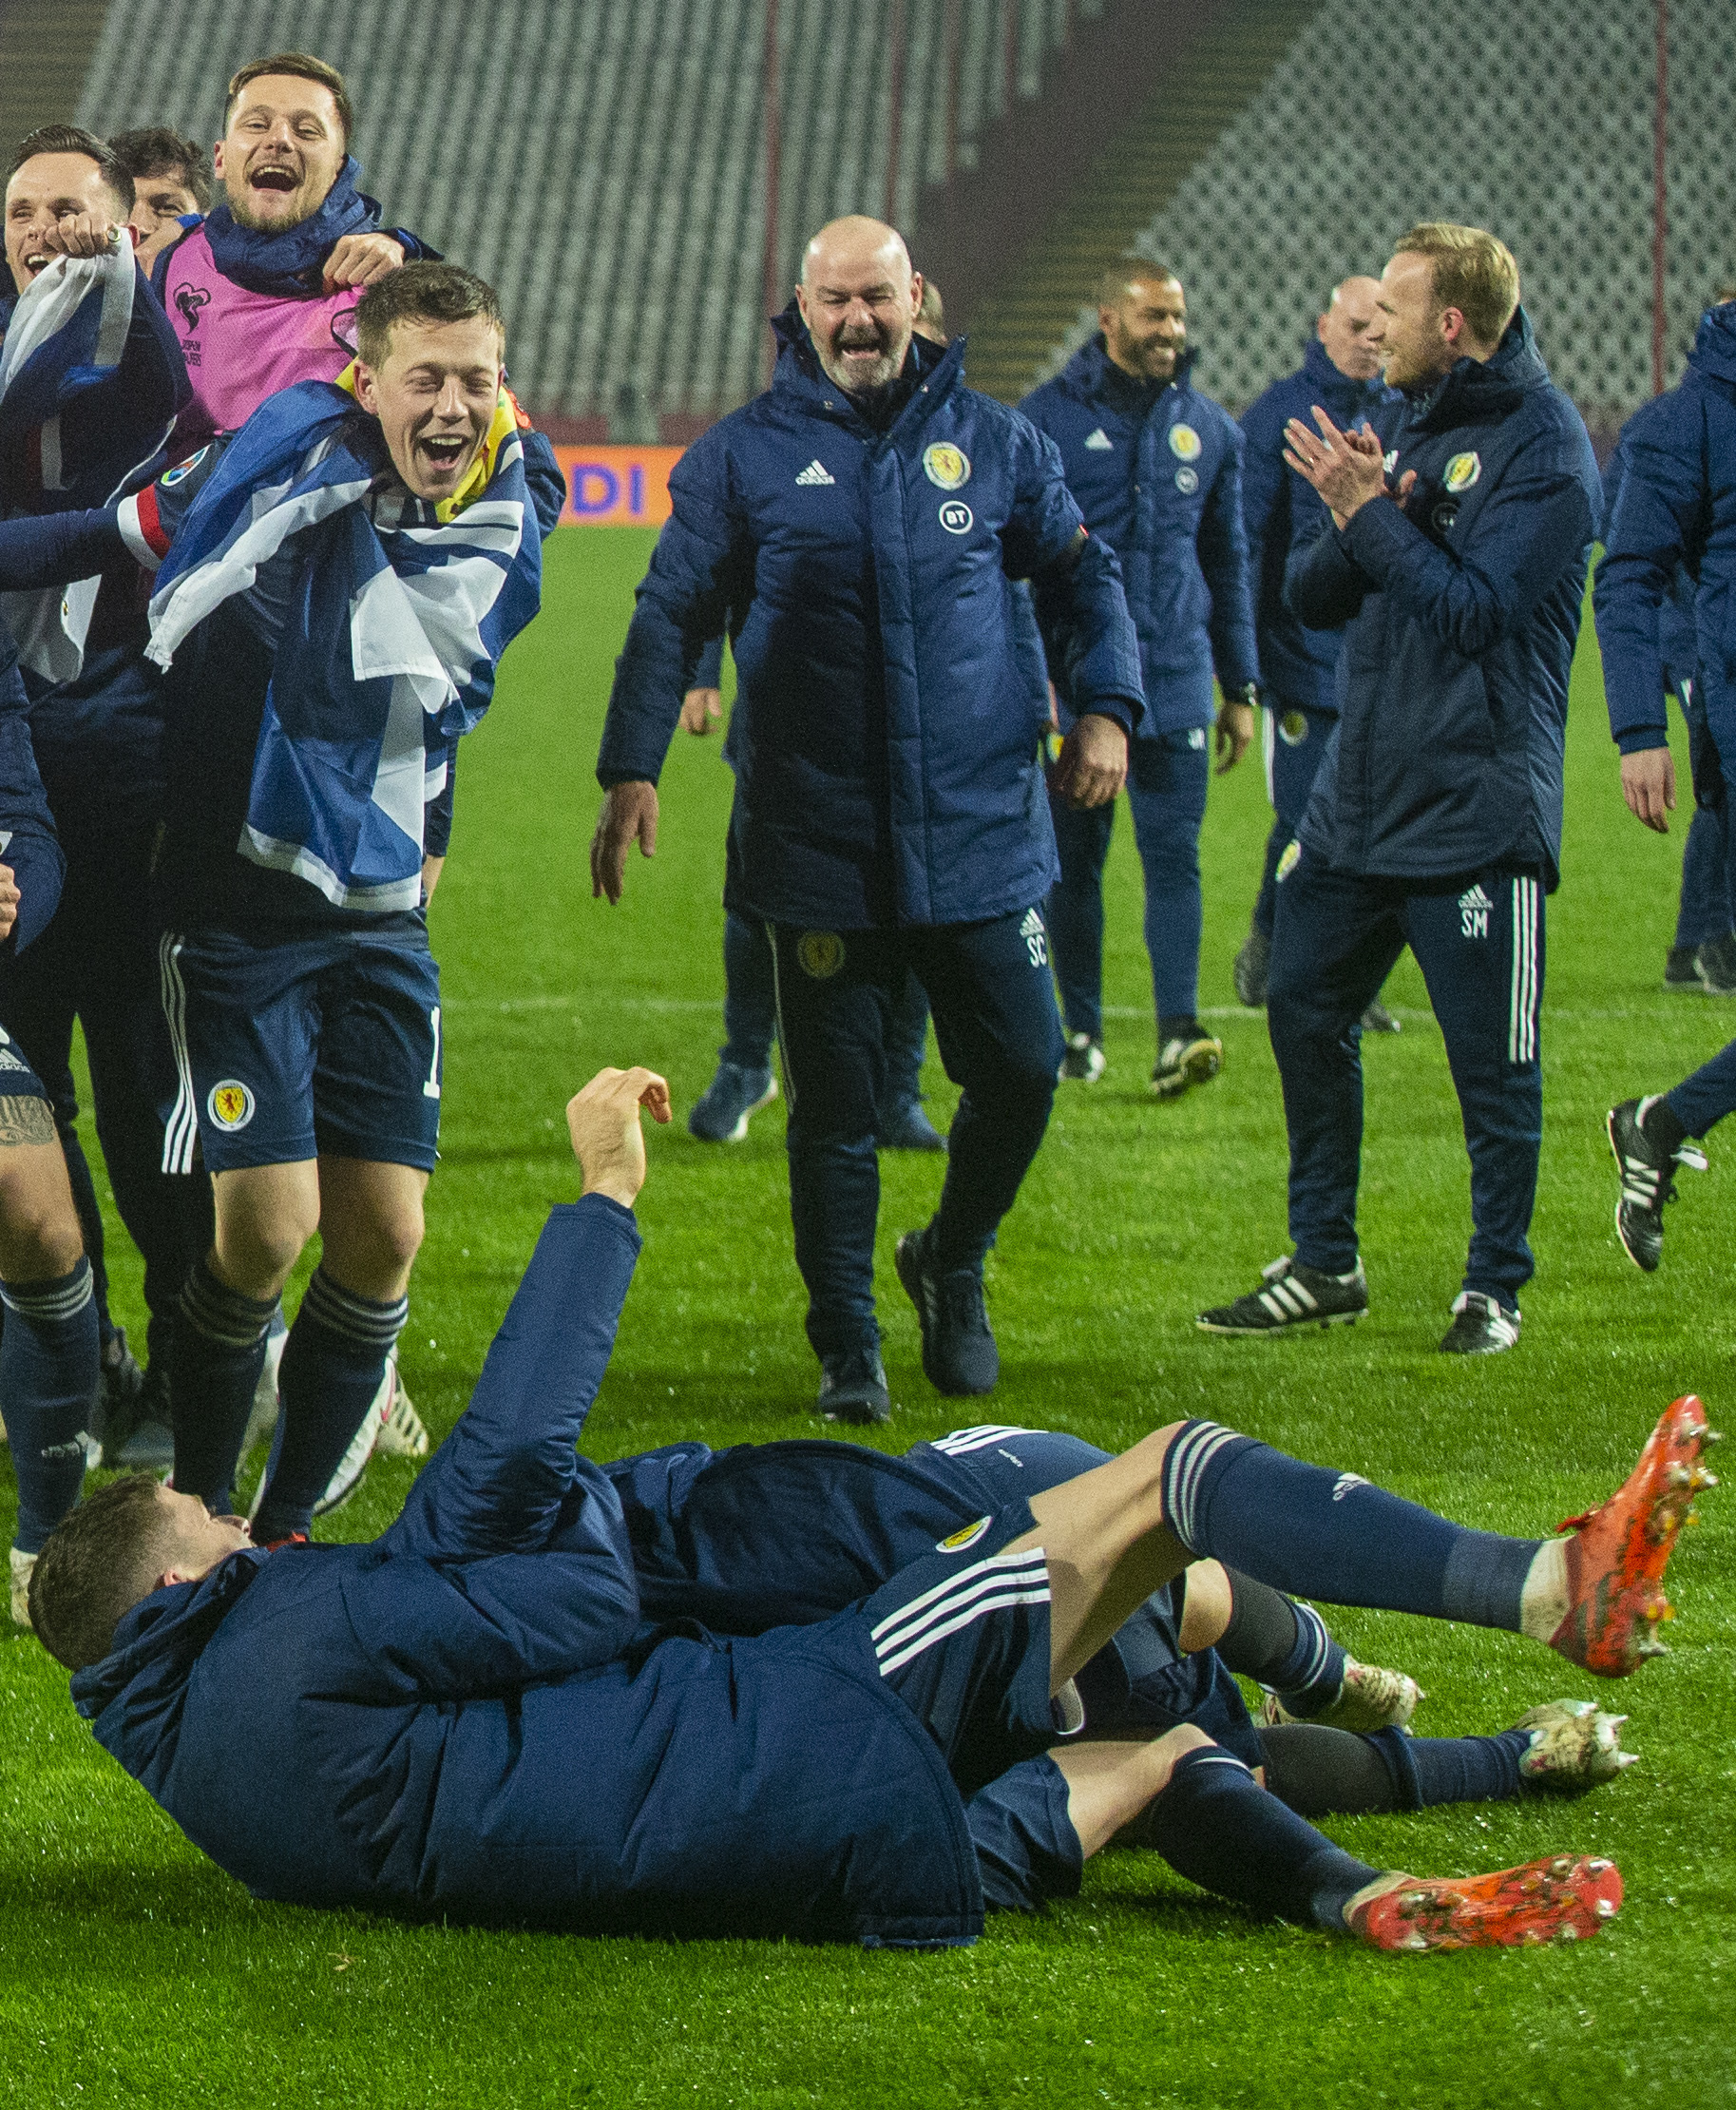 Scotland manager Steve Clarke celebrates at full time during the UEFA Euro 2020 Qualifier between Serbia and Scotland at the Stadion Rajko Mitic 